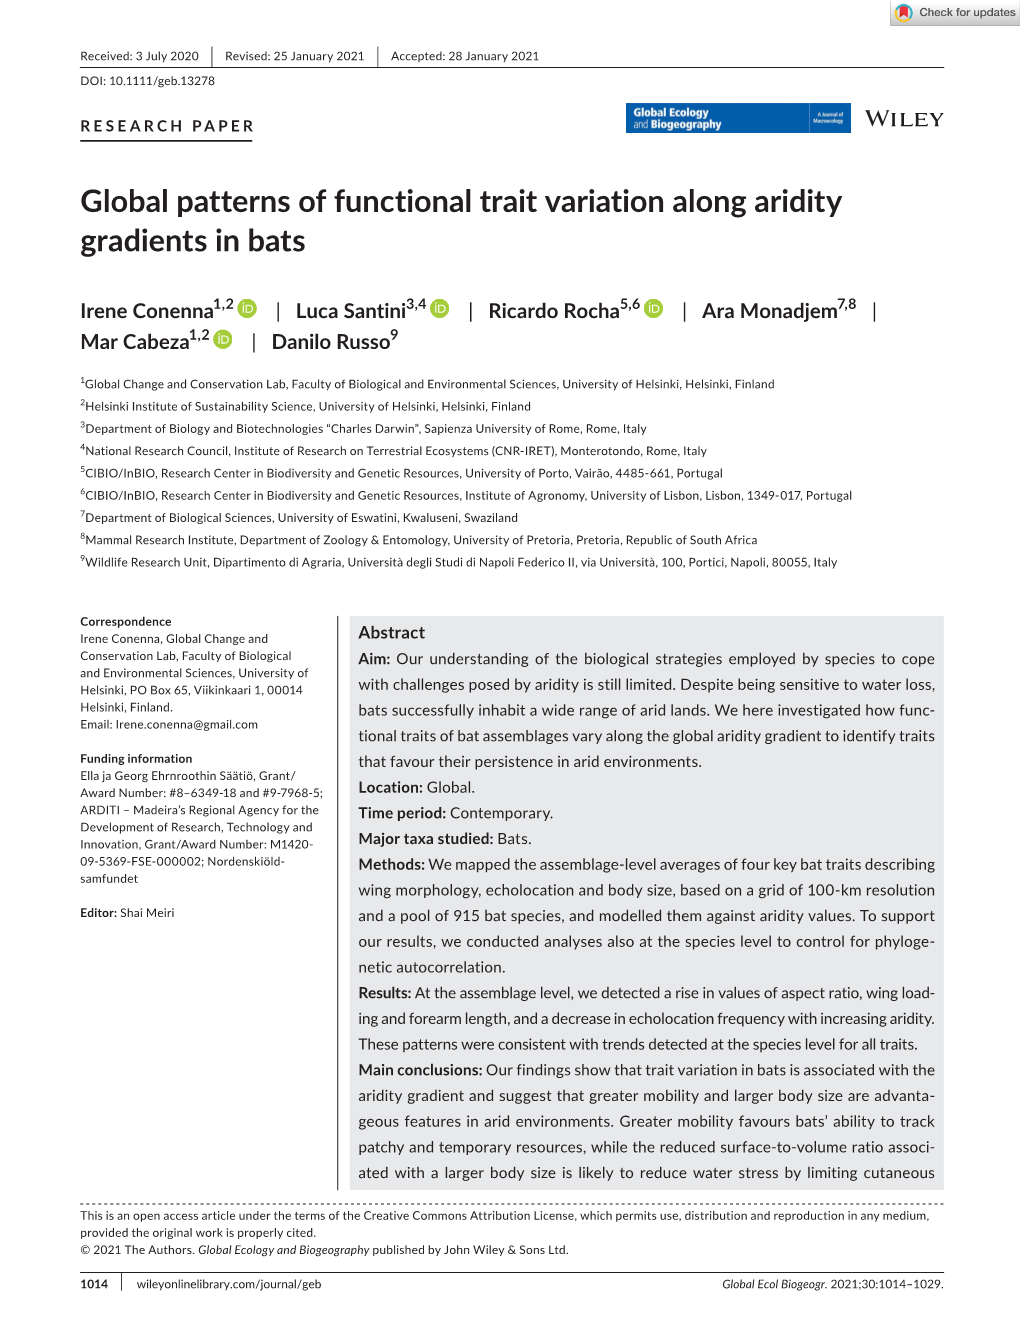 Global Patterns of Functional Trait Variation Along Aridity Gradients in Bats